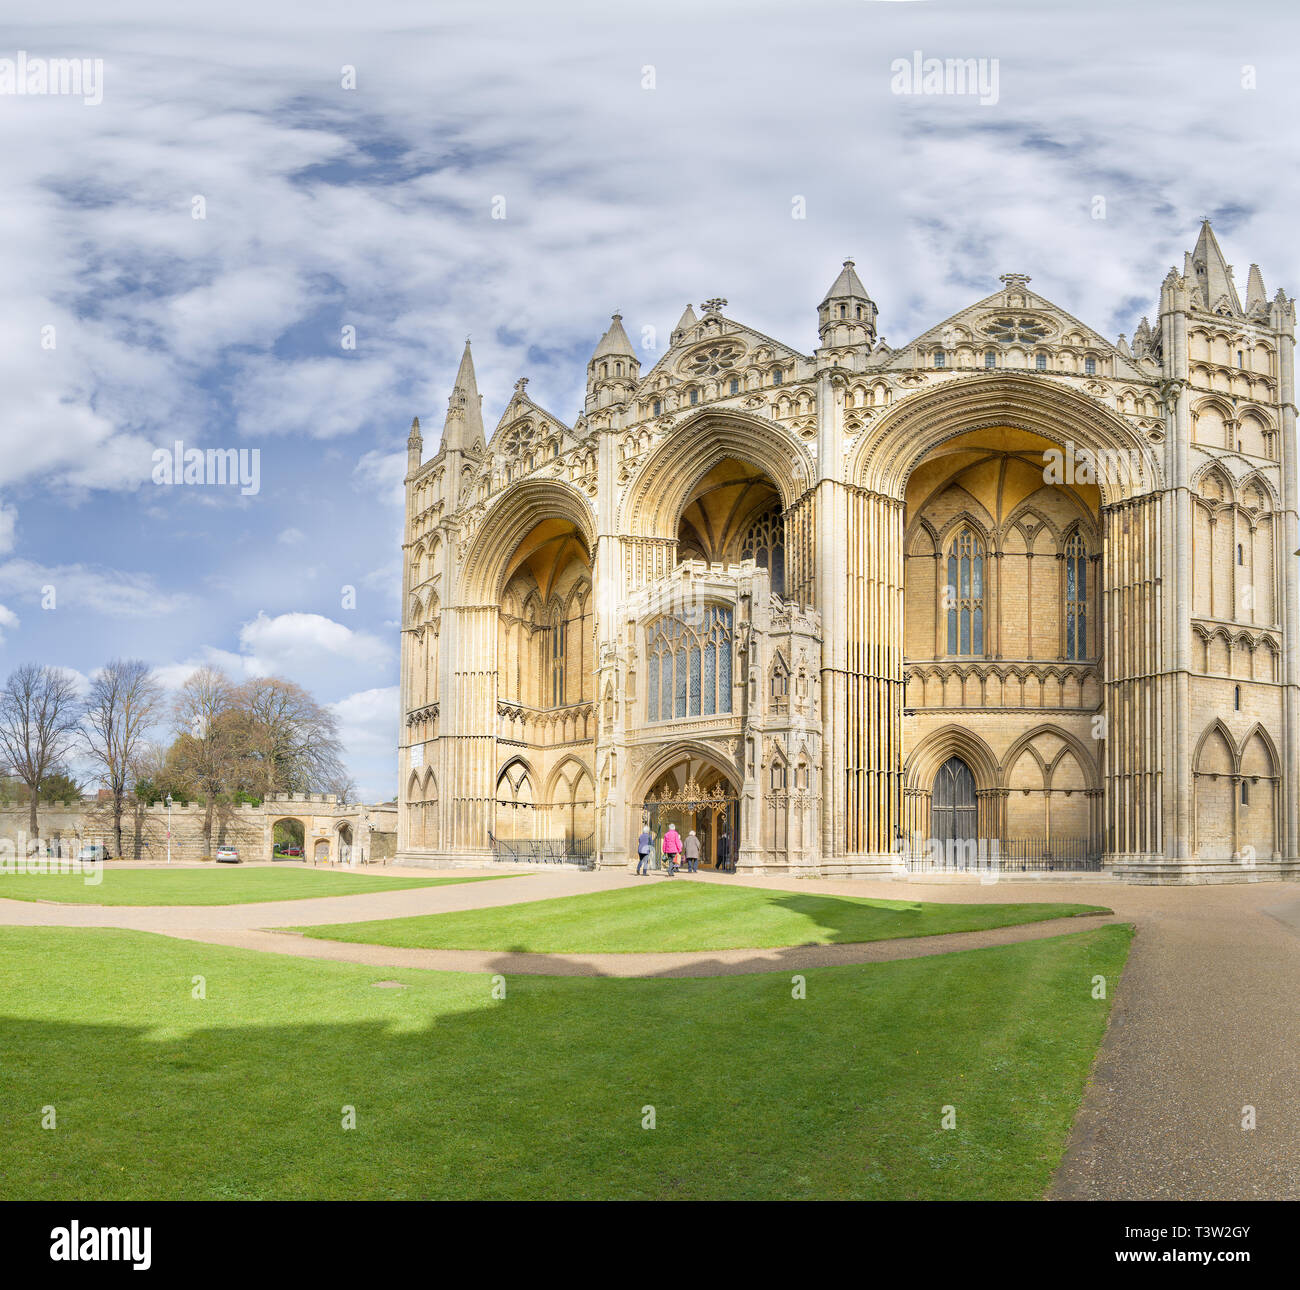 Fronte ovest di Peterborough Cathedral, Inghilterra. Foto Stock